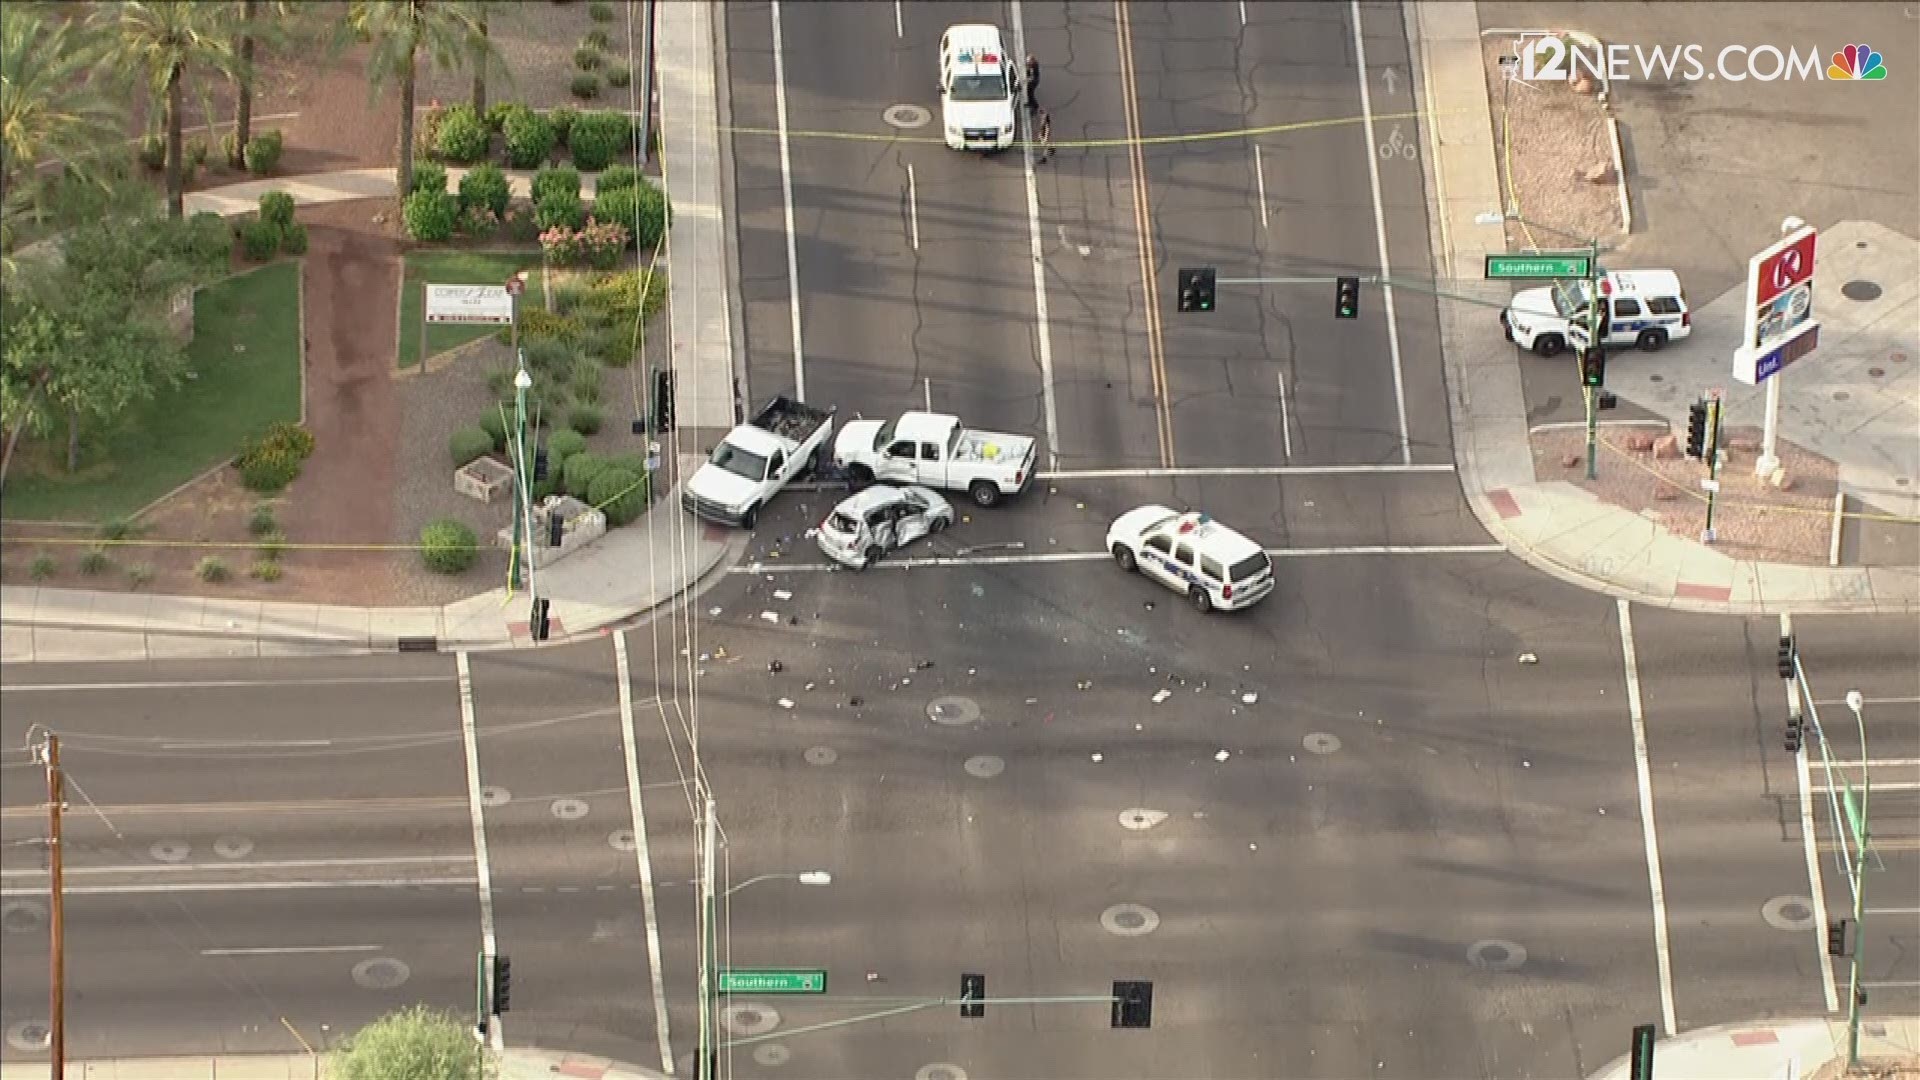 One woman has died following a car accident at the intersection of 24th Street and Southern.